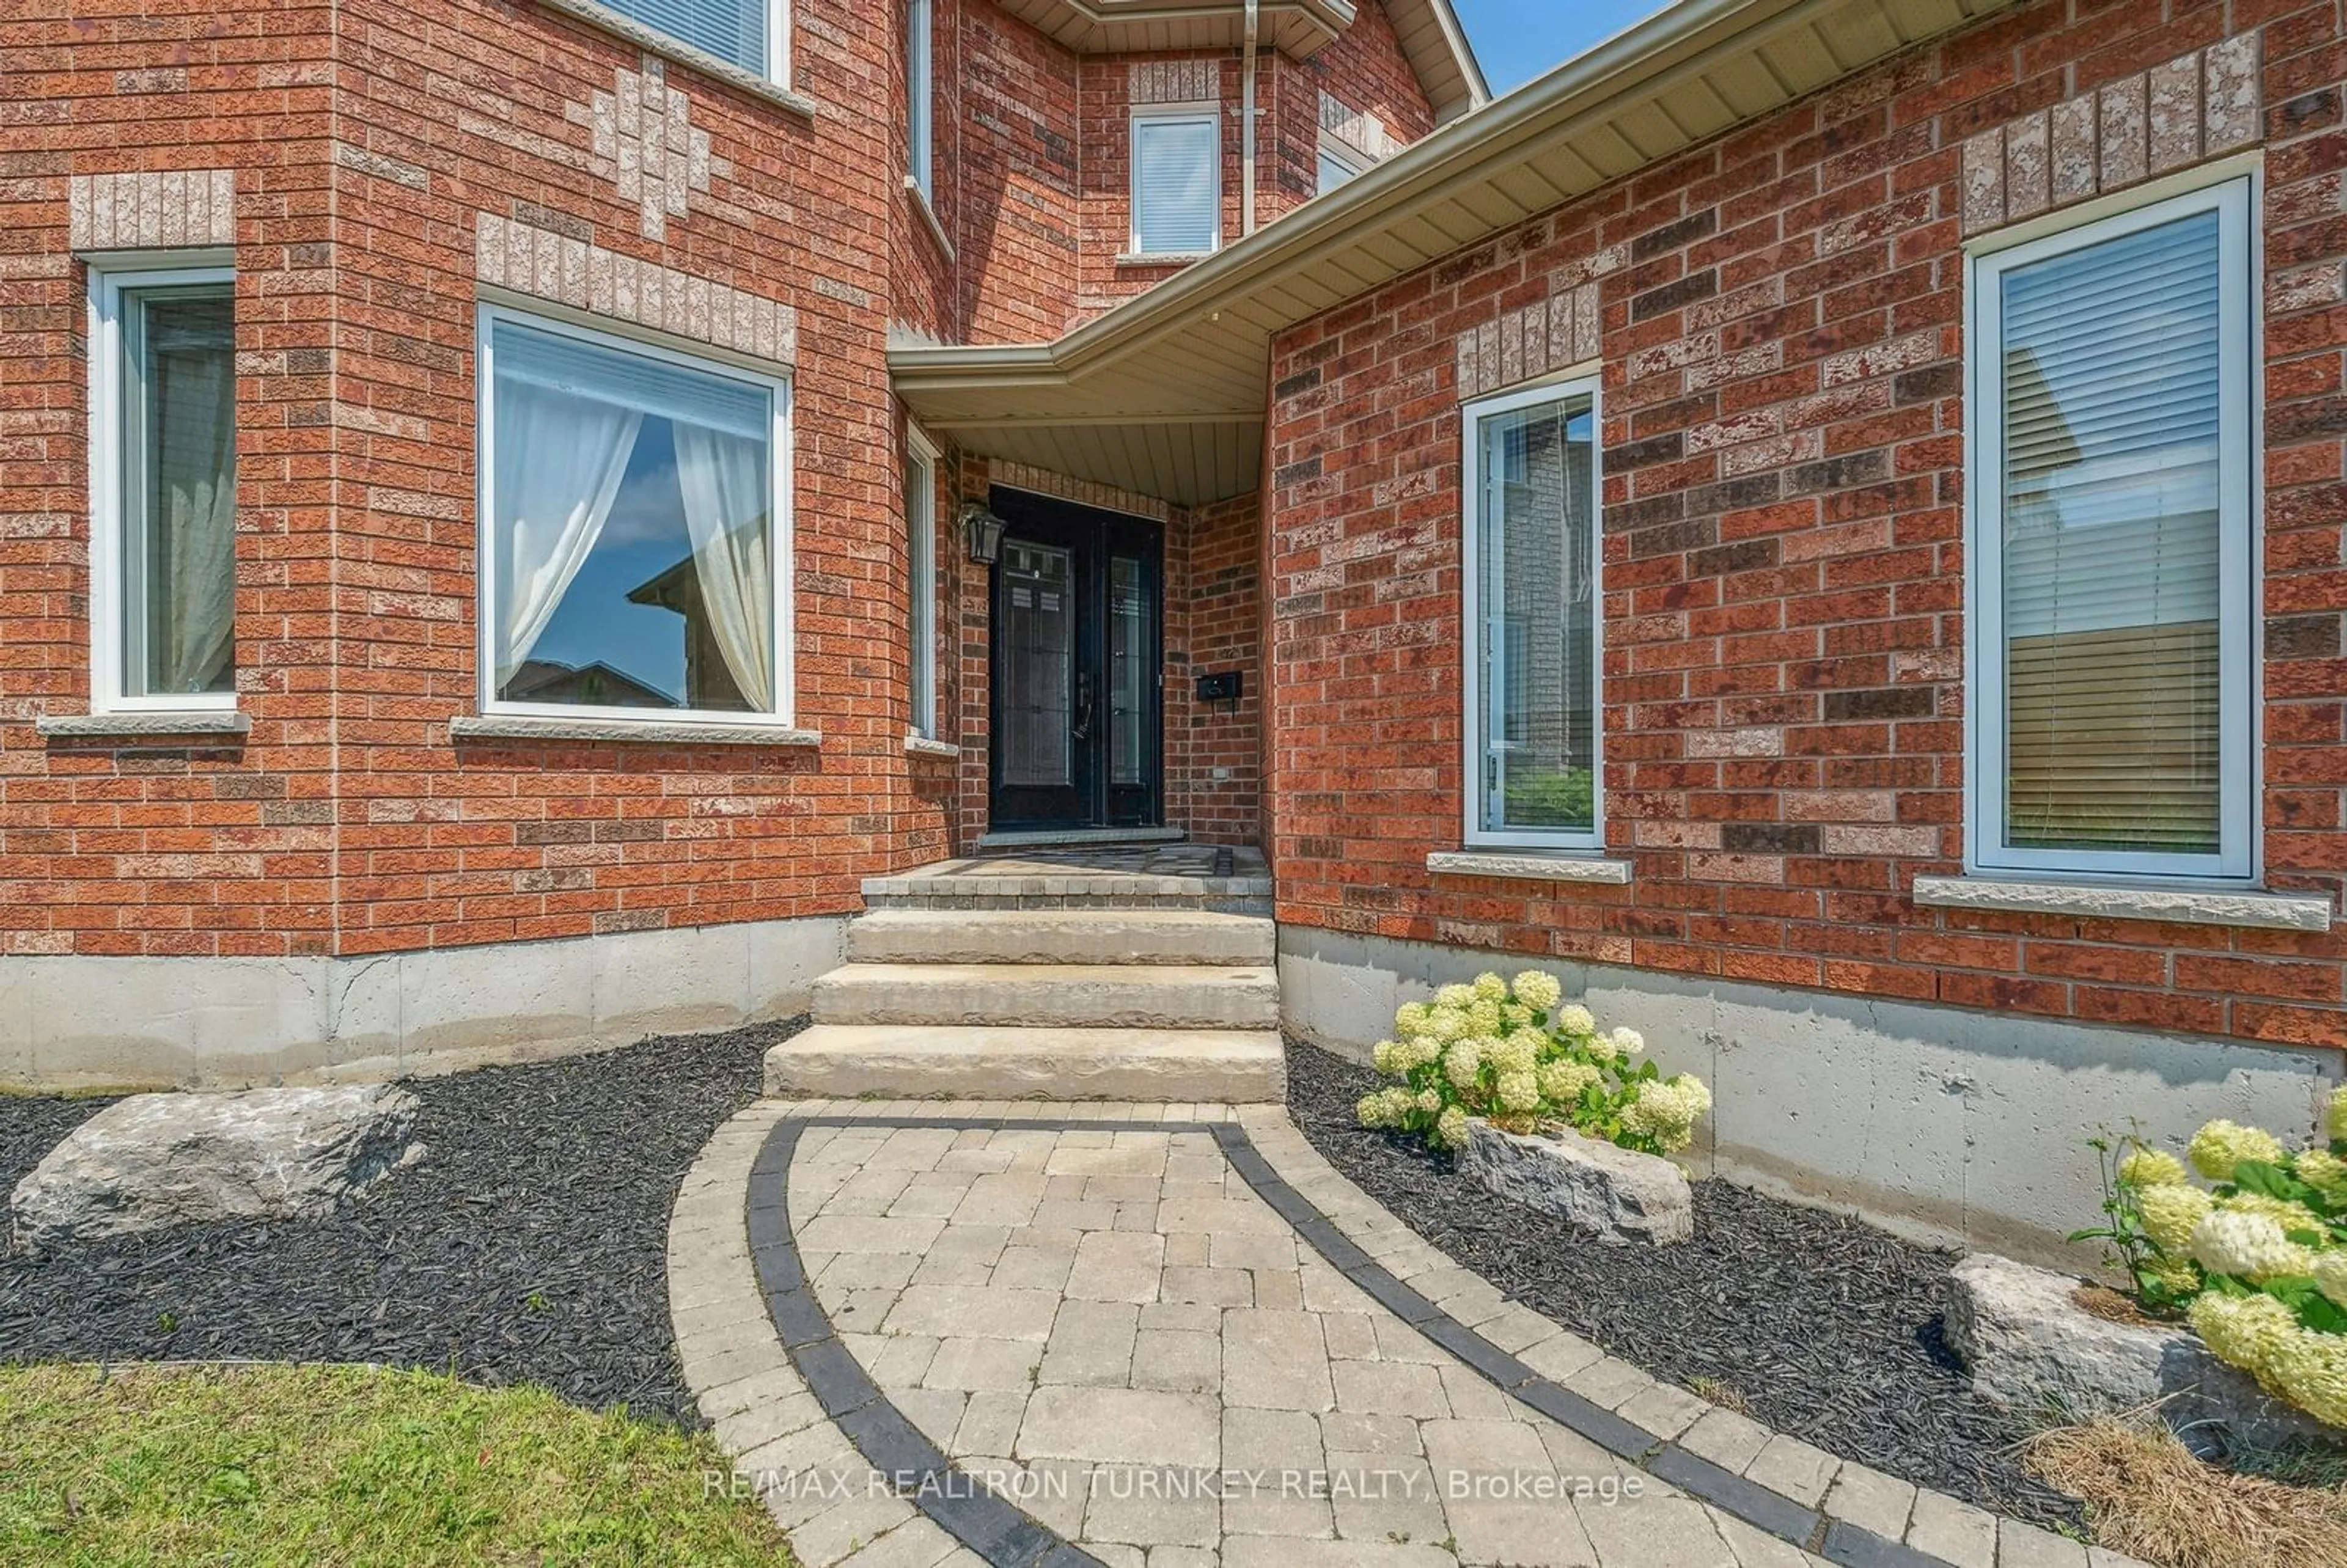 Home with brick exterior material for 18 White Elm Rd, Barrie Ontario L4N 8S9